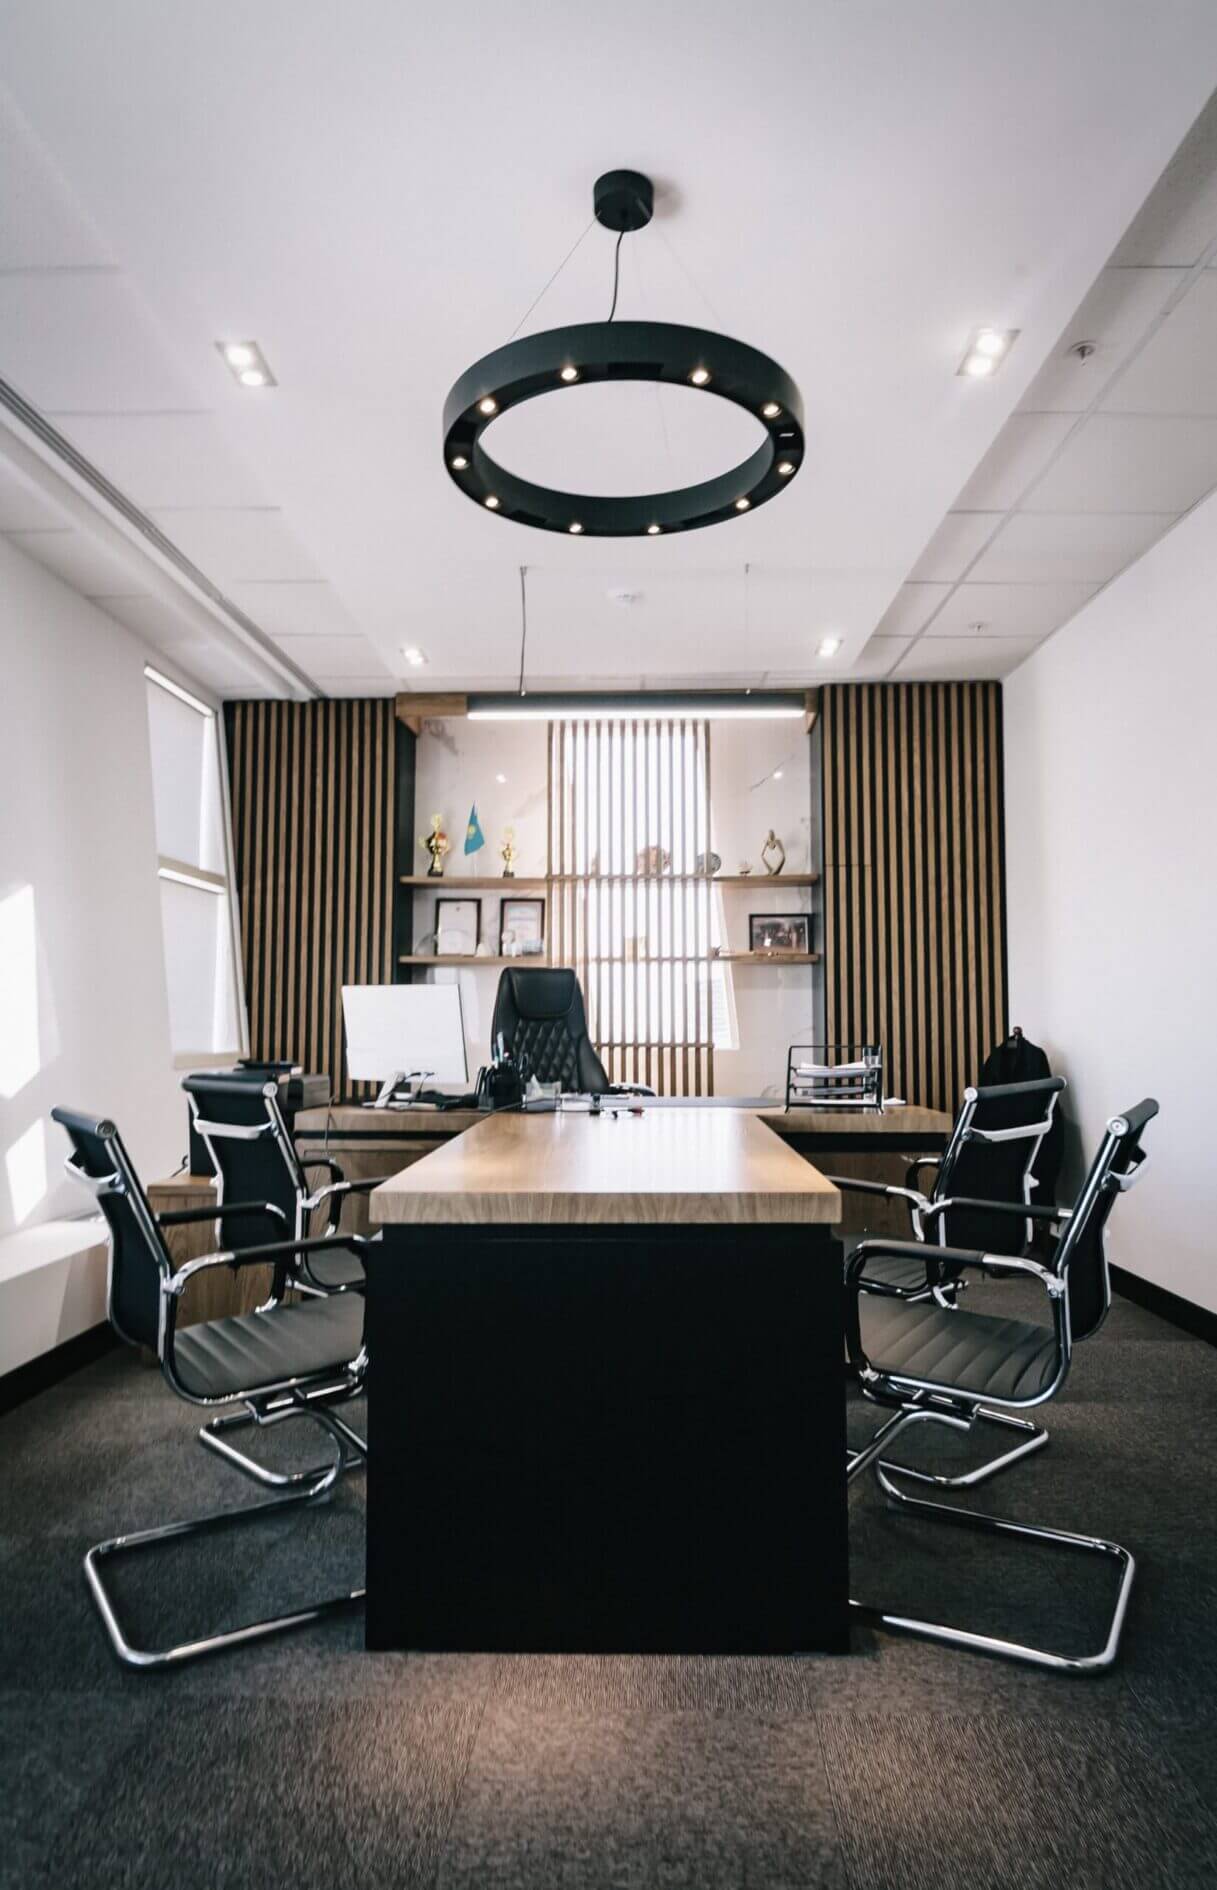 Designing a Sophisticated Conference Room